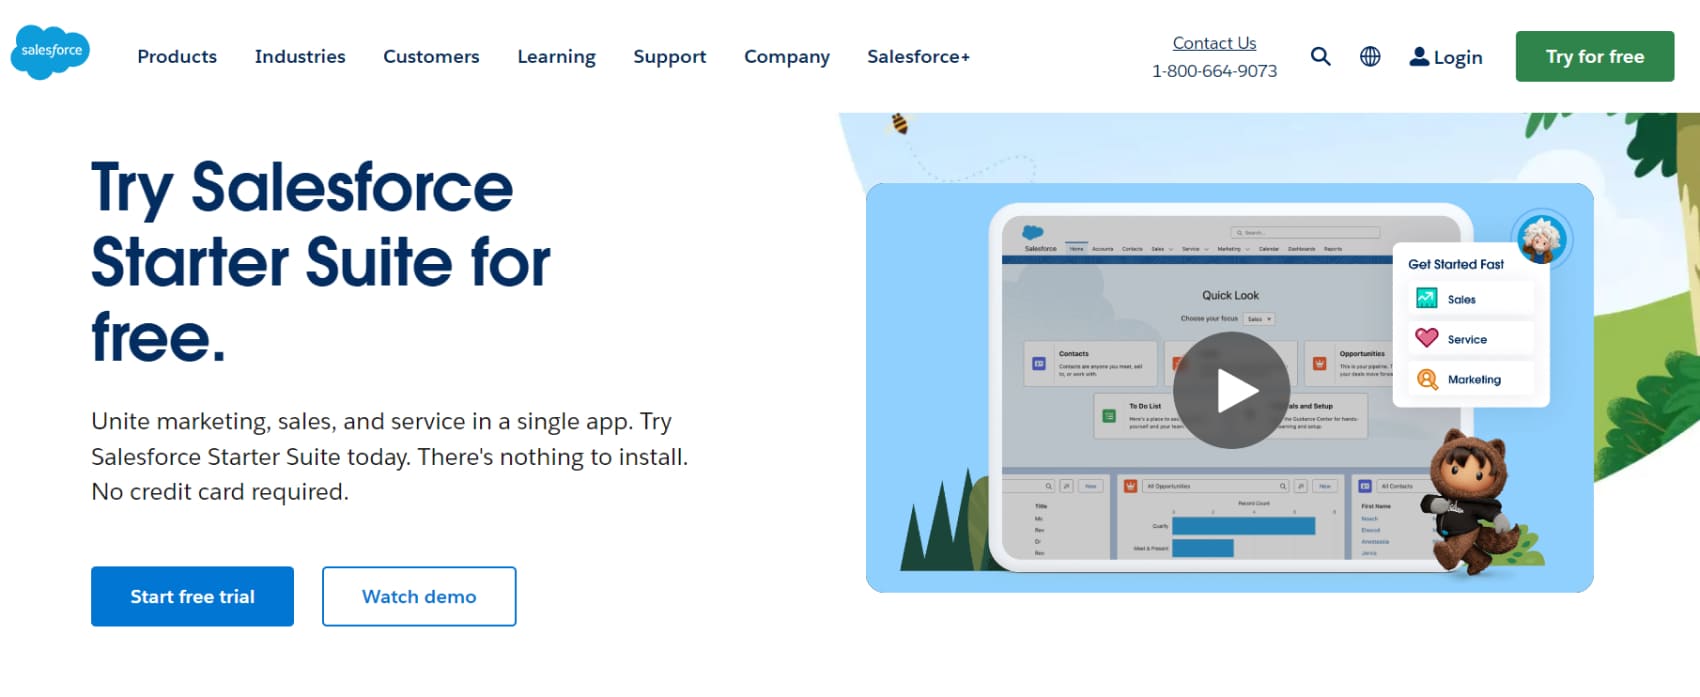 Salesforce is one of the tools for inbound marketing